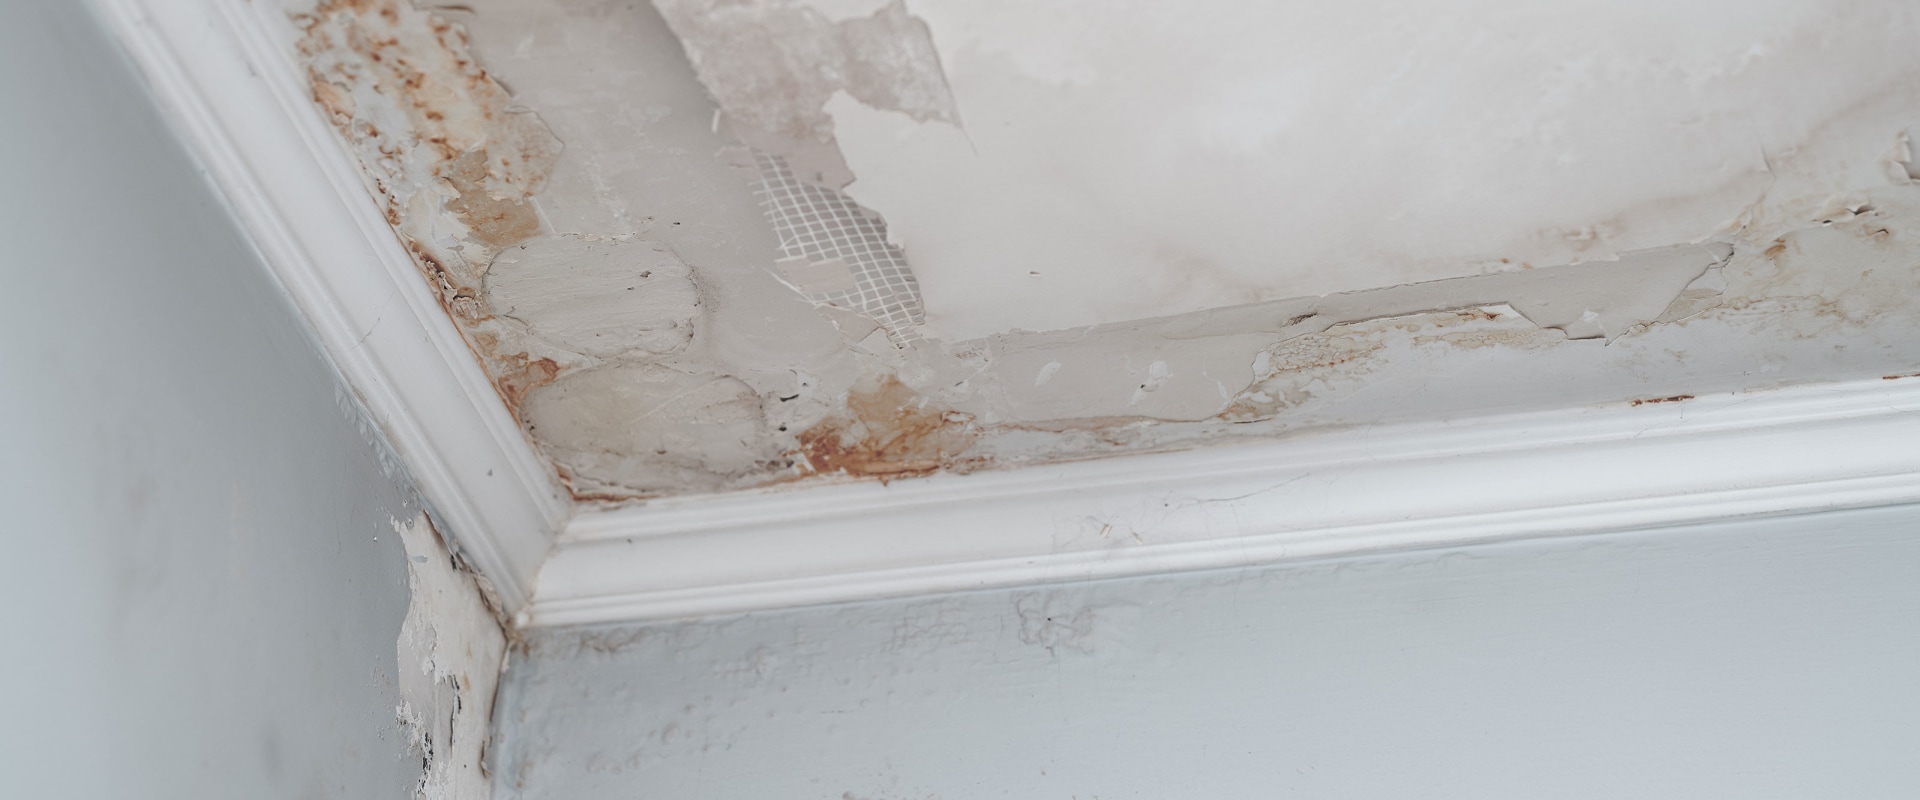 How to Fix Water Damage: A Step-by-Step Guide